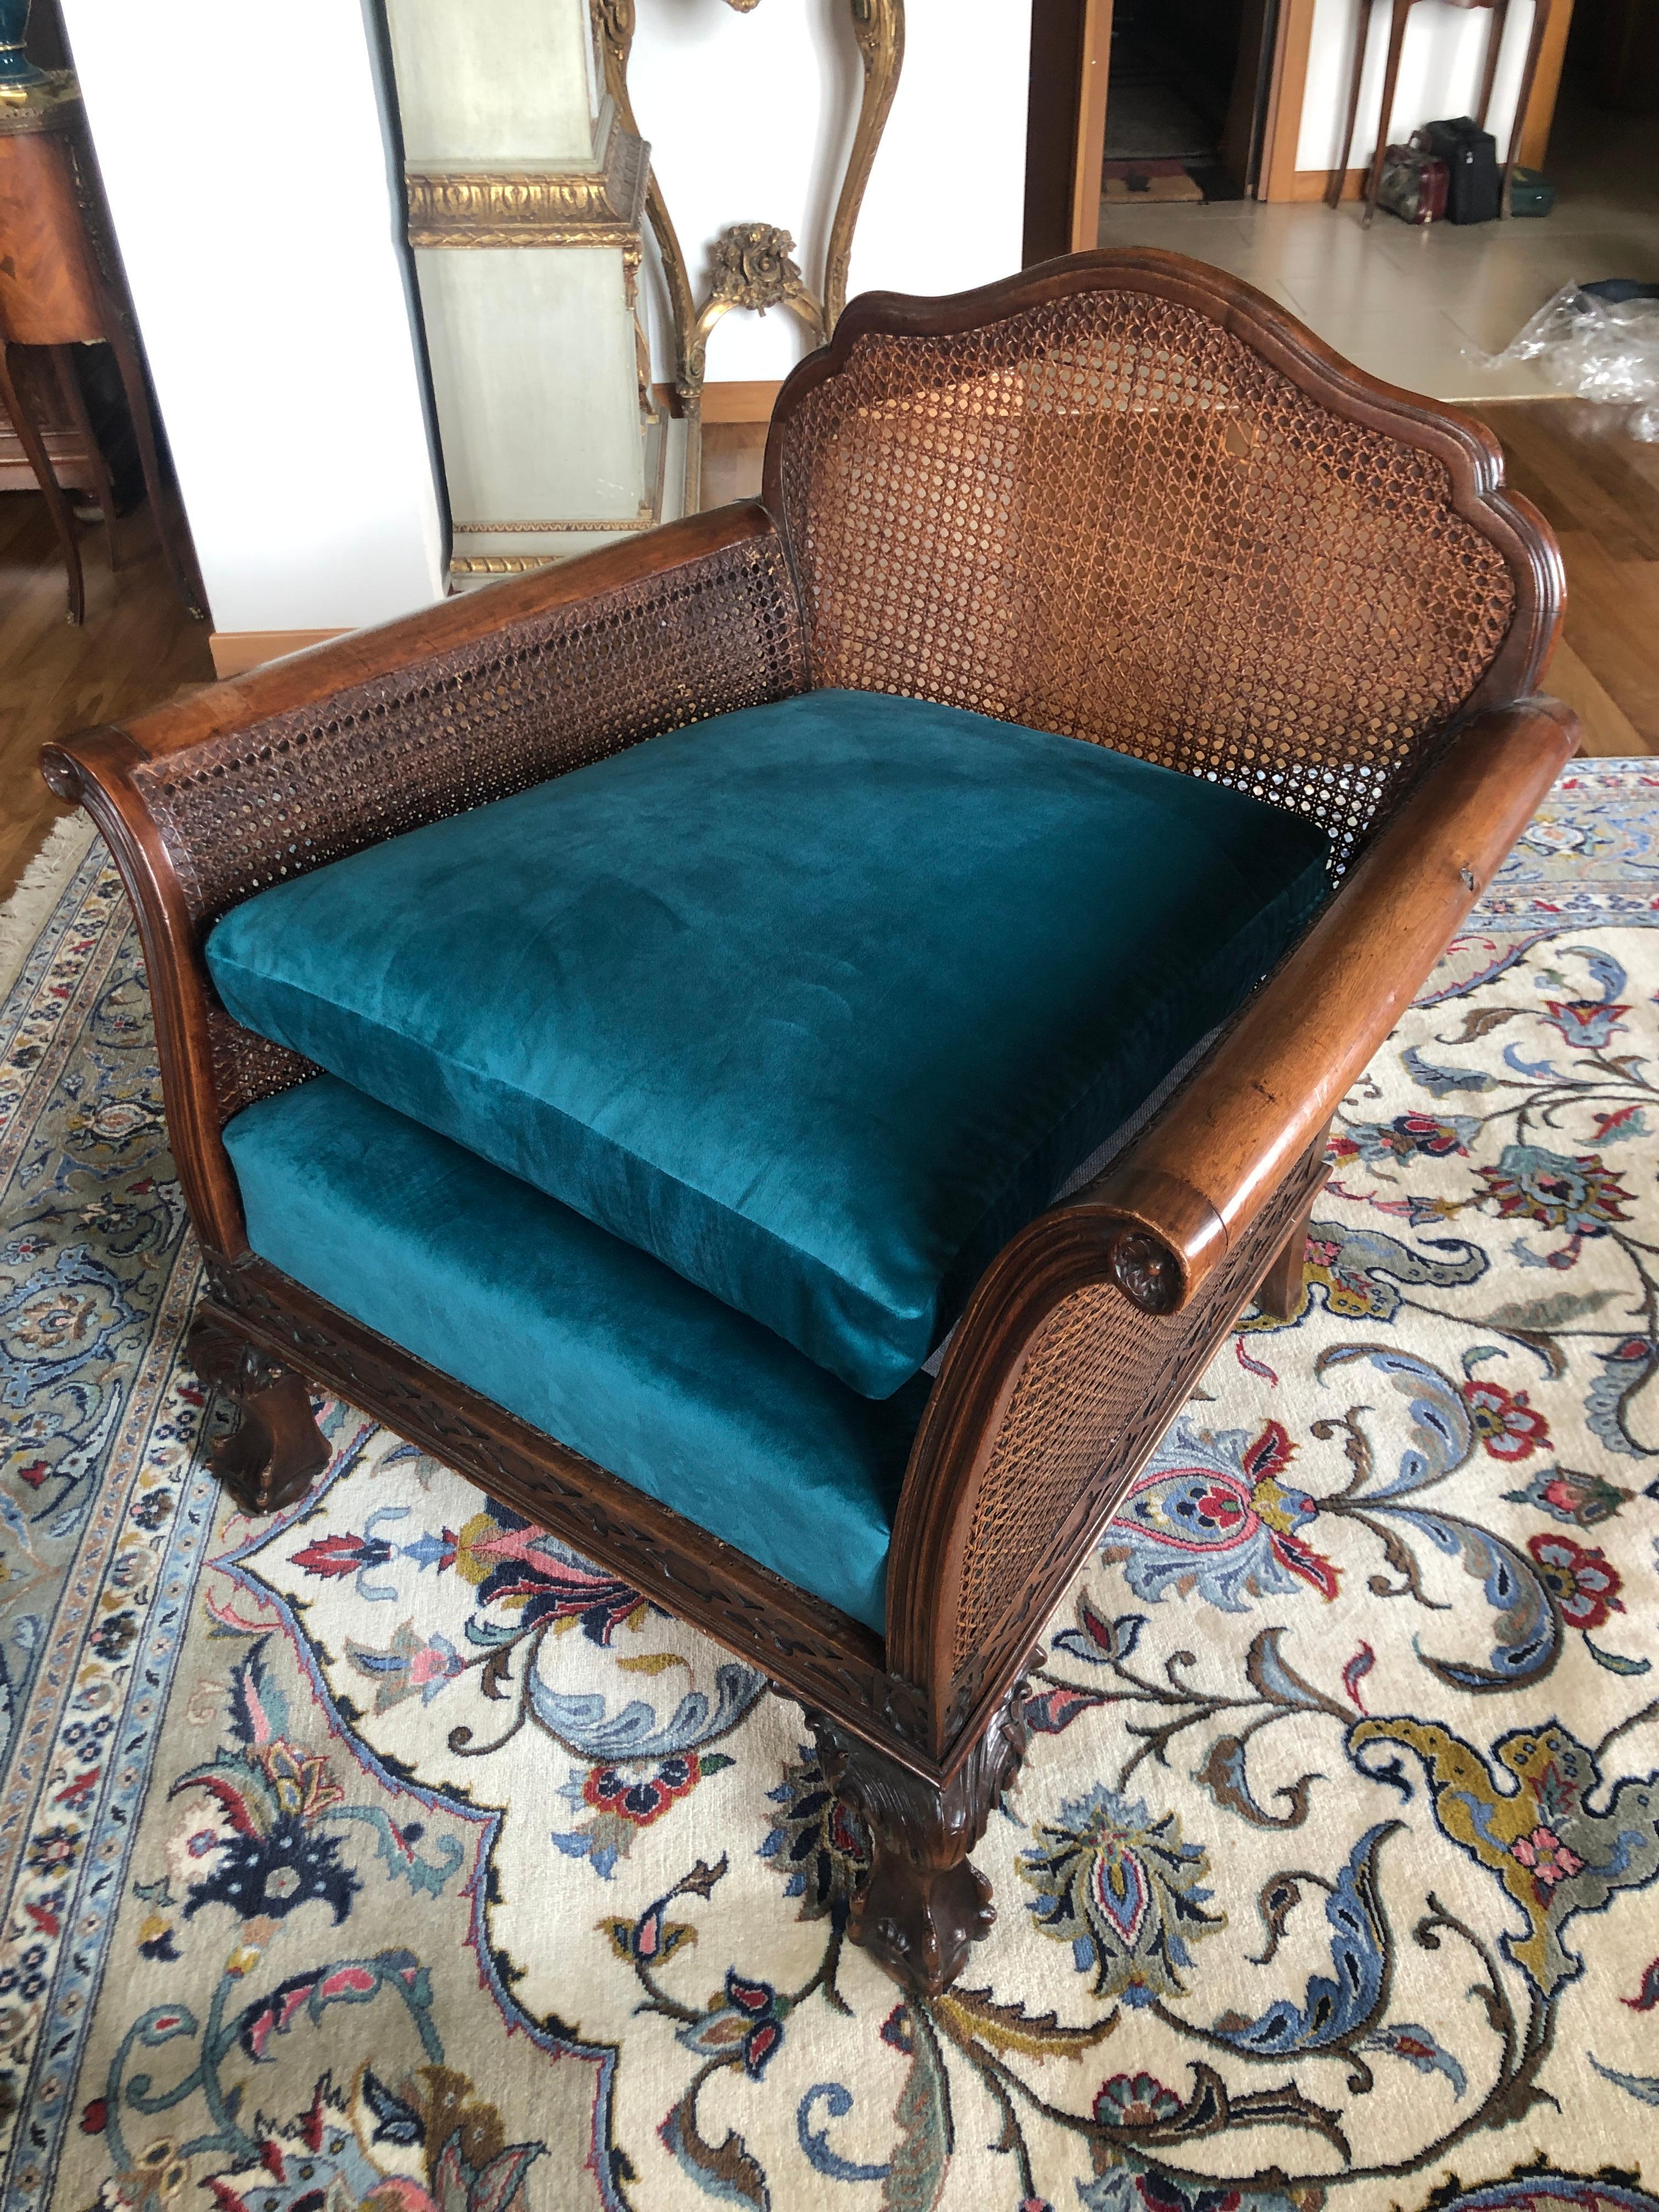 Pair of dark flame birch carved armchairs upholstered in blue. Features caned back and arms and exposed carved wood that has a handsomely aged patina.
France, circa 1920.